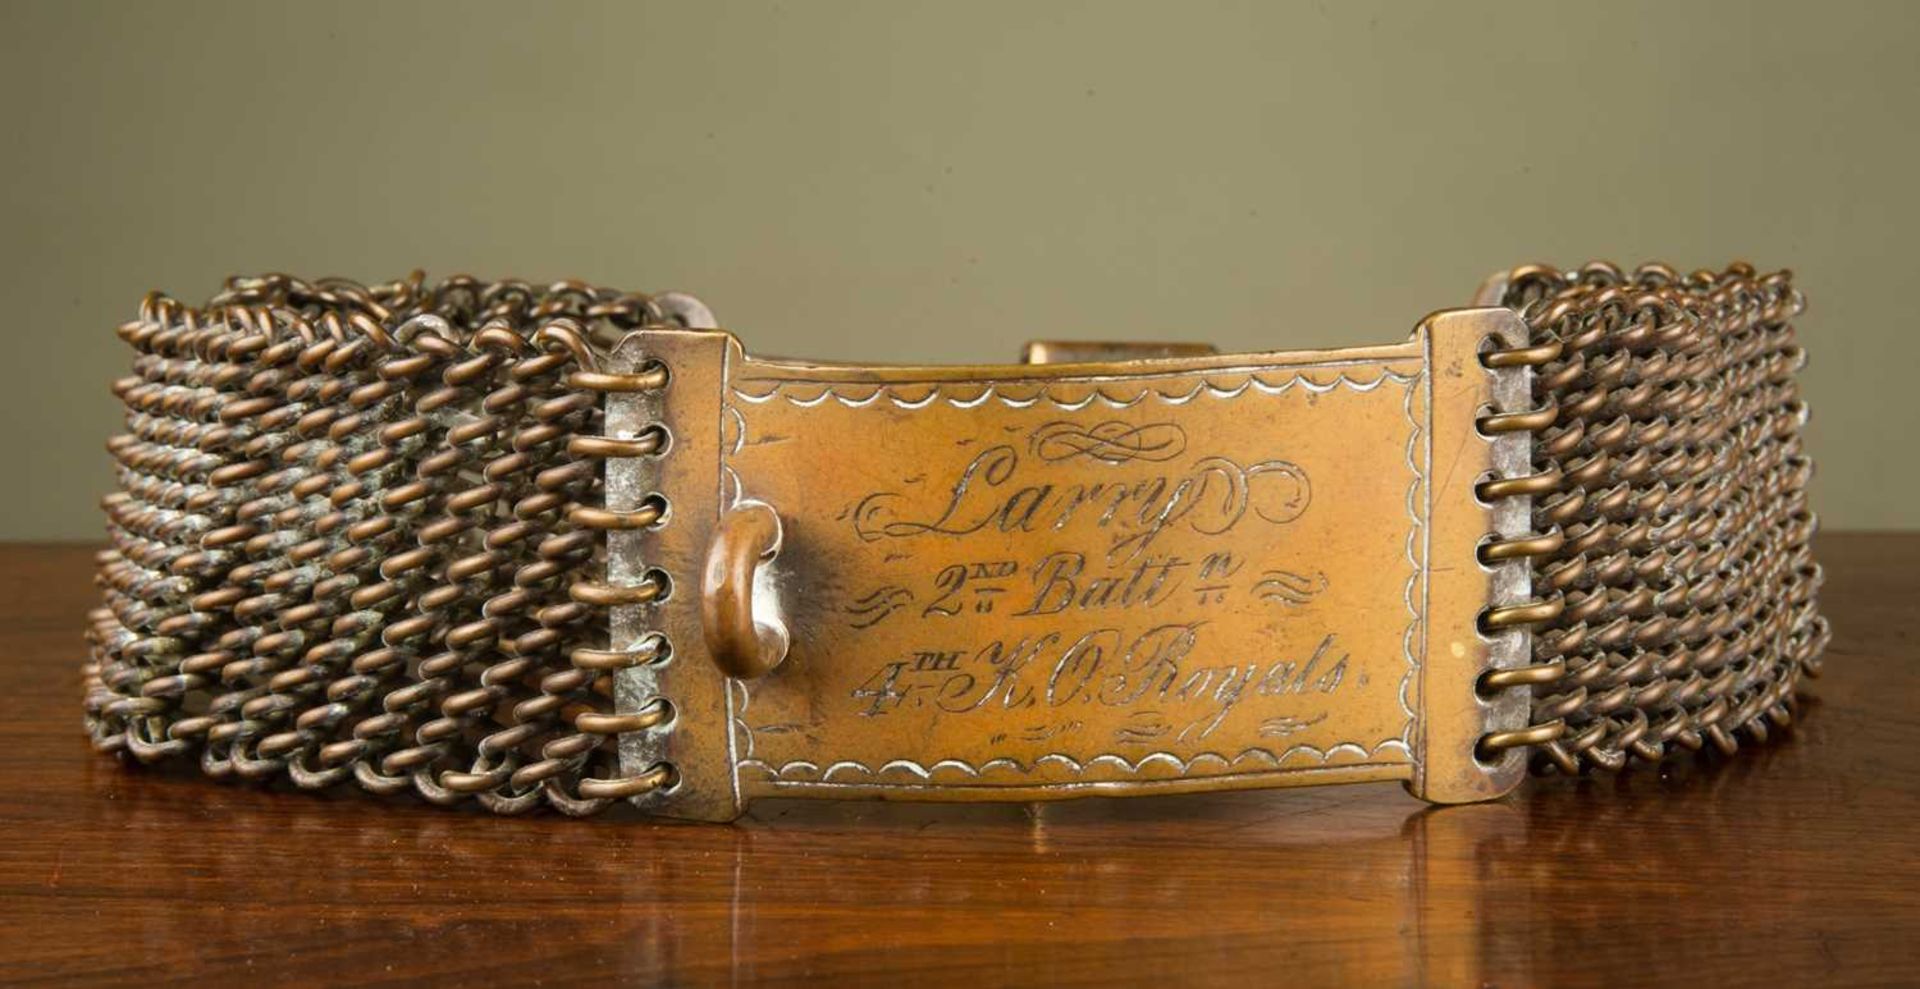 A 19th or early 20th century brass animal collar, possibly a goat, the collar inscribed 'Larry,